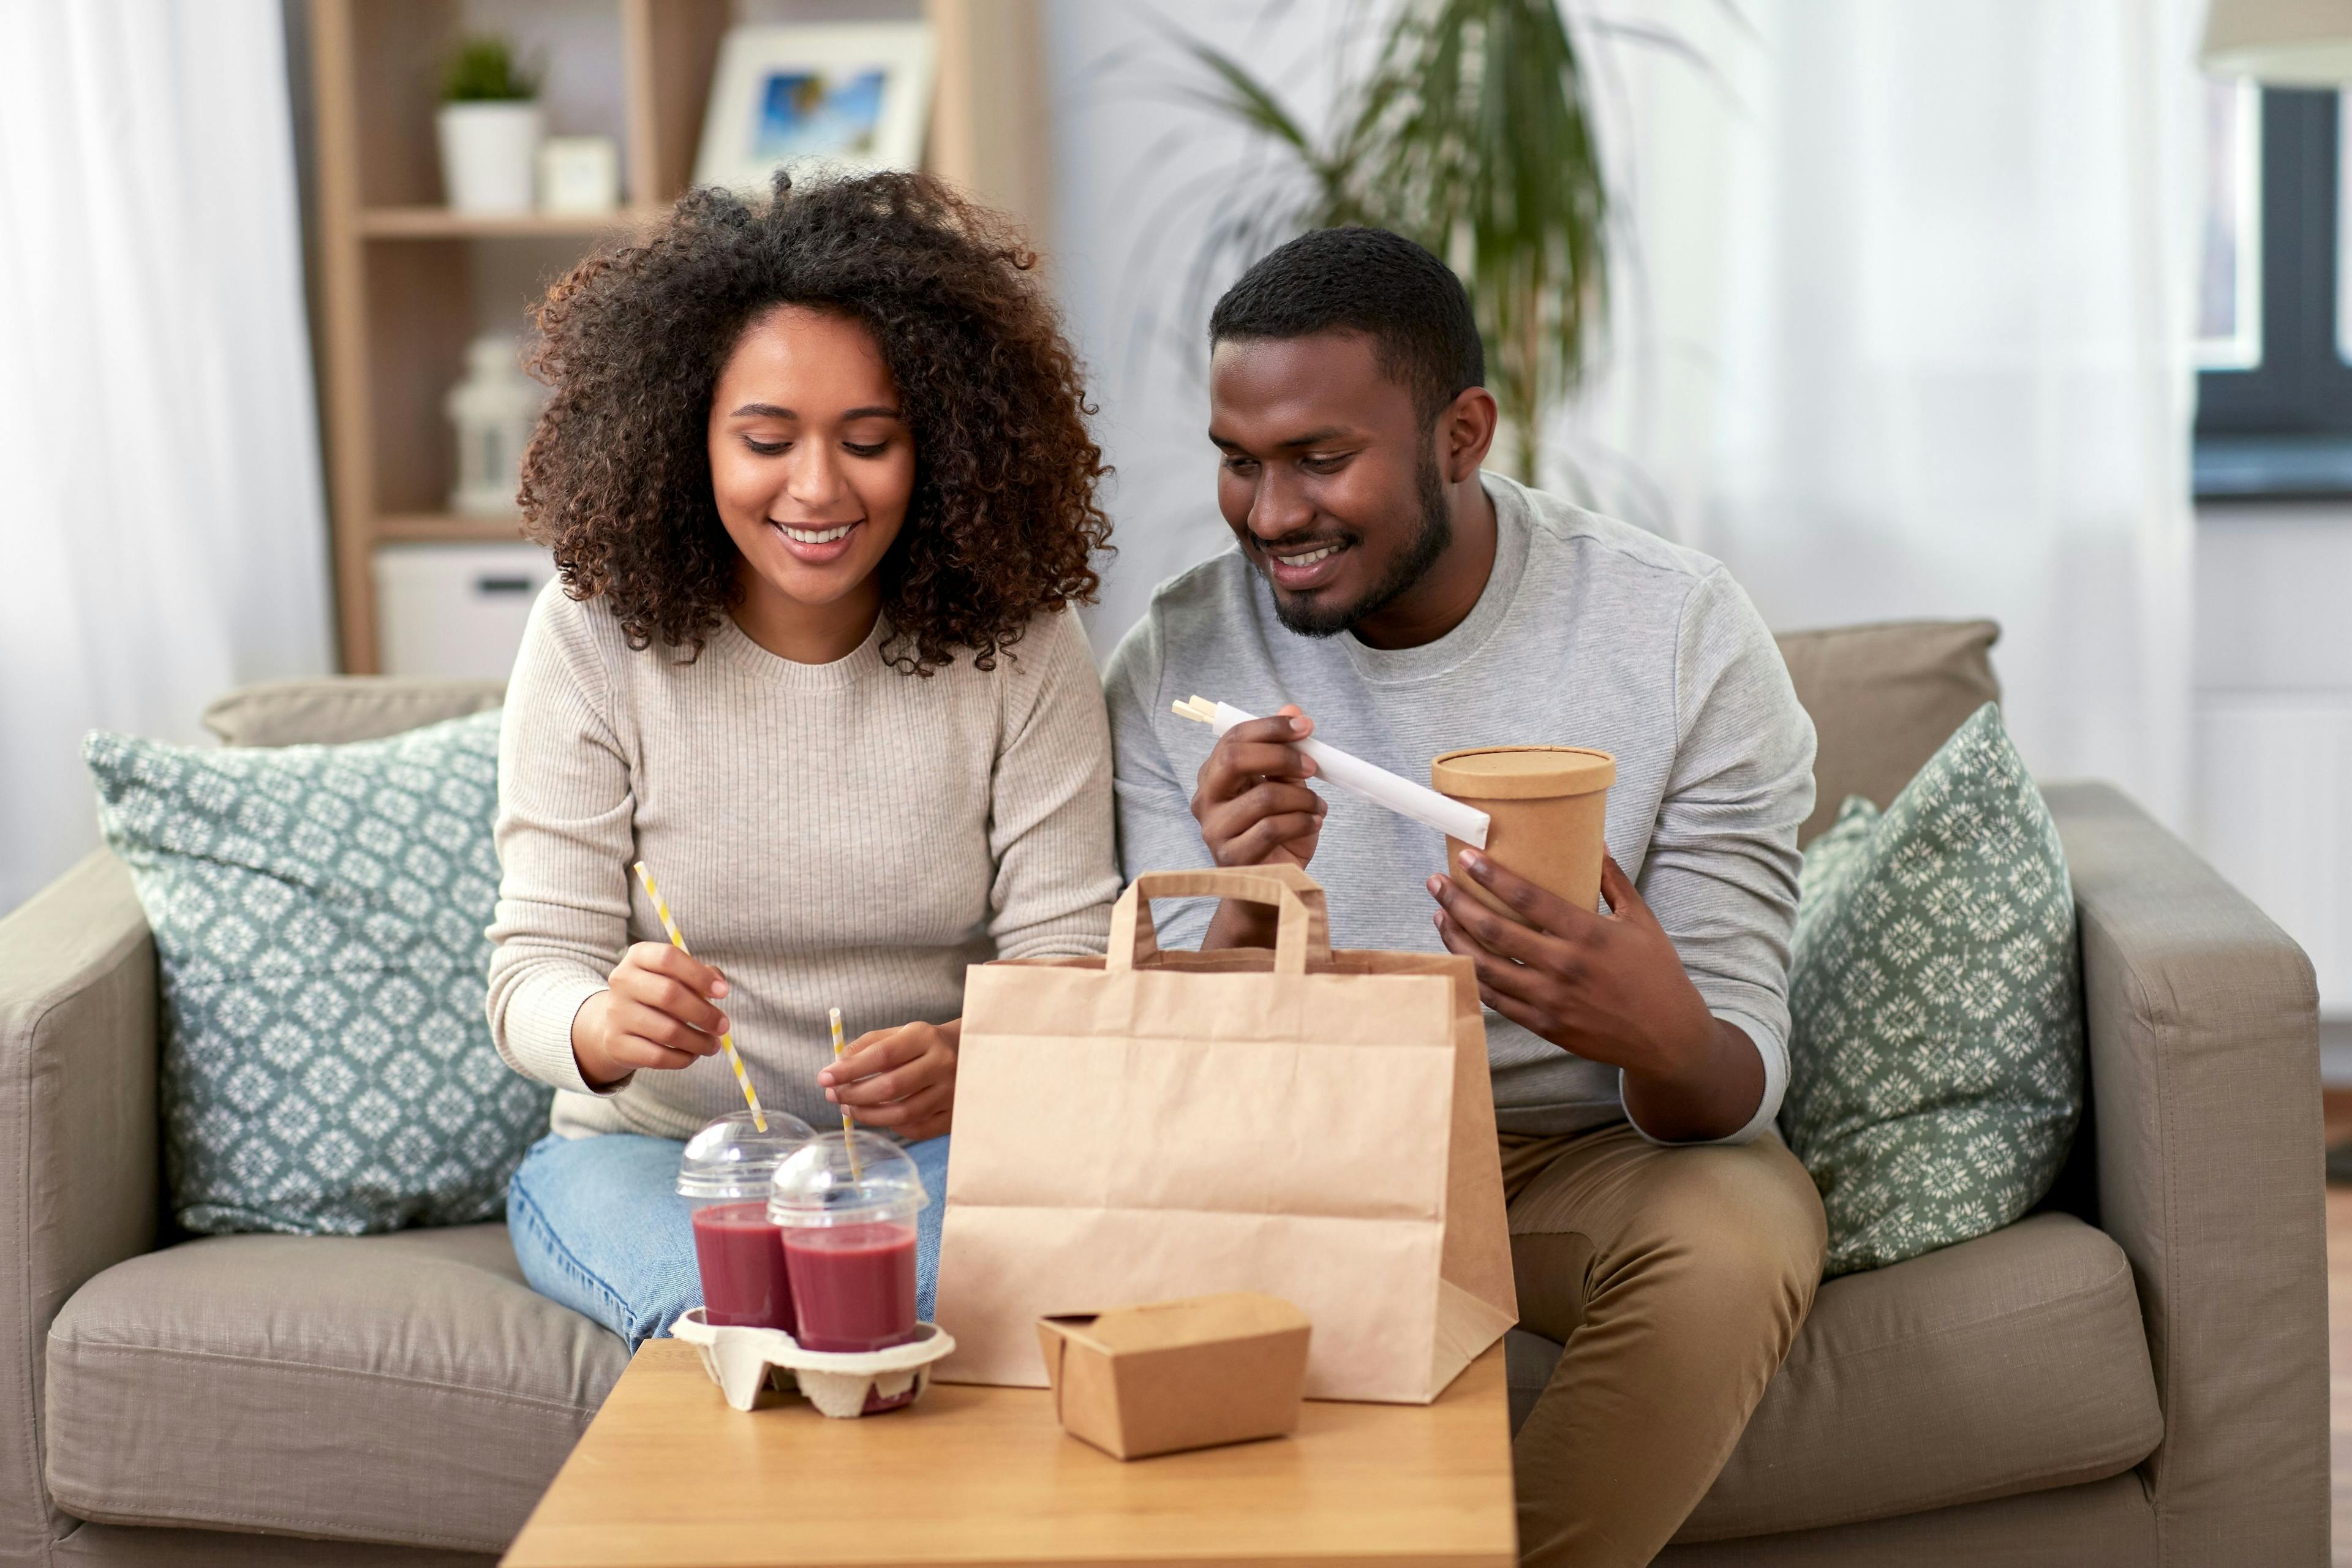 A young couple enjoying takeout lunch on the couch.